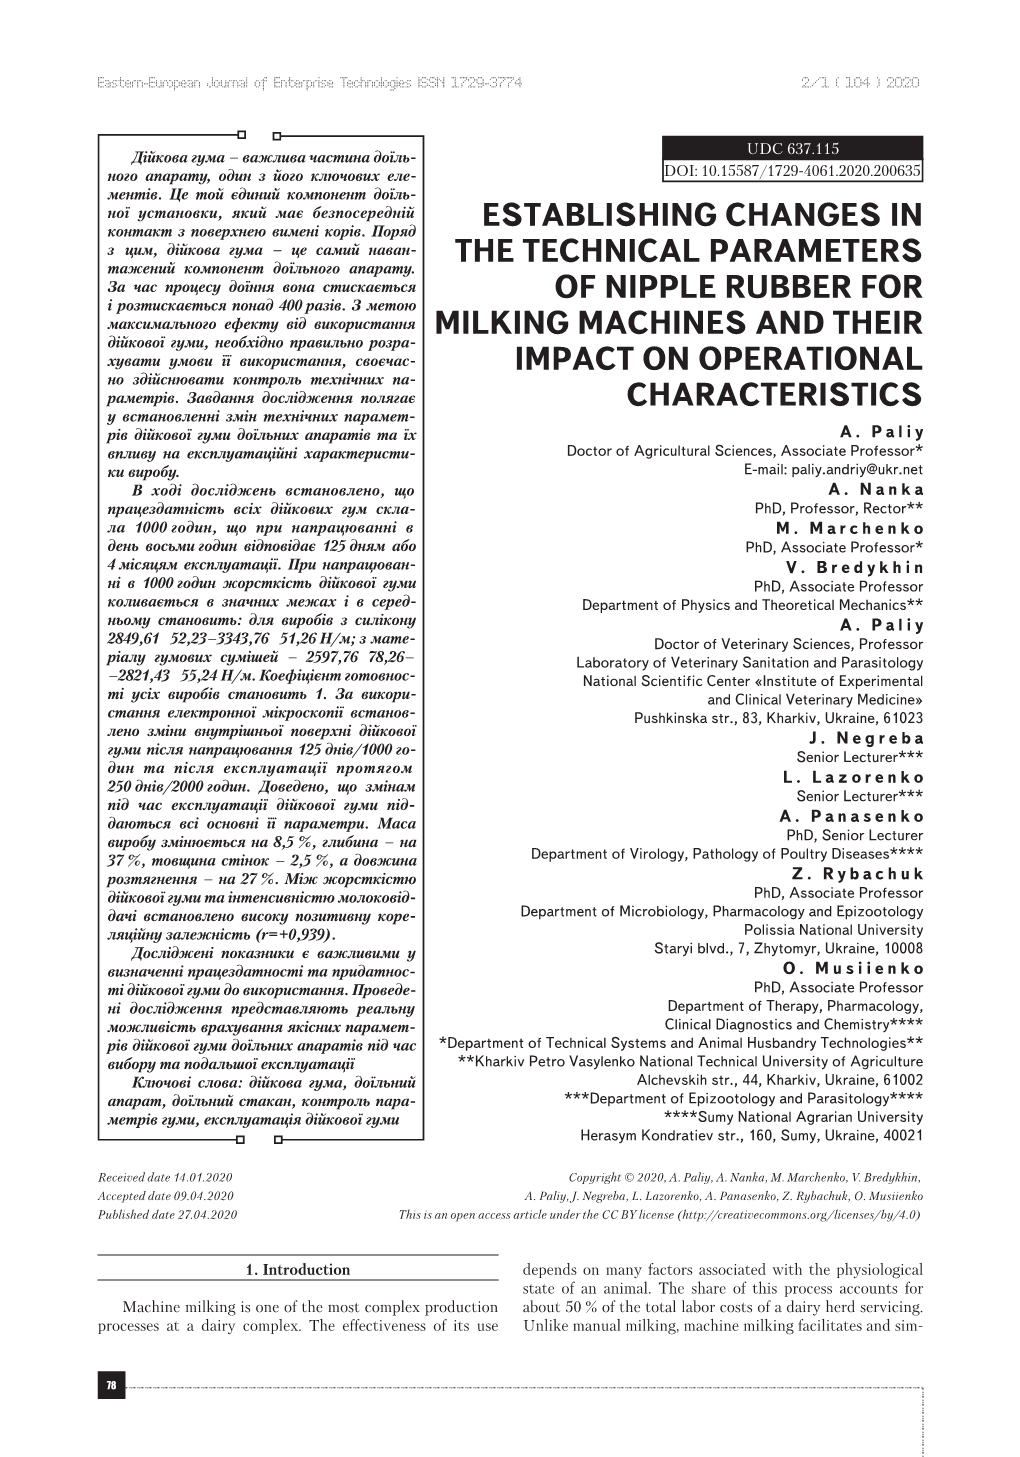 Establishing Changes in the Technical Parameters Of